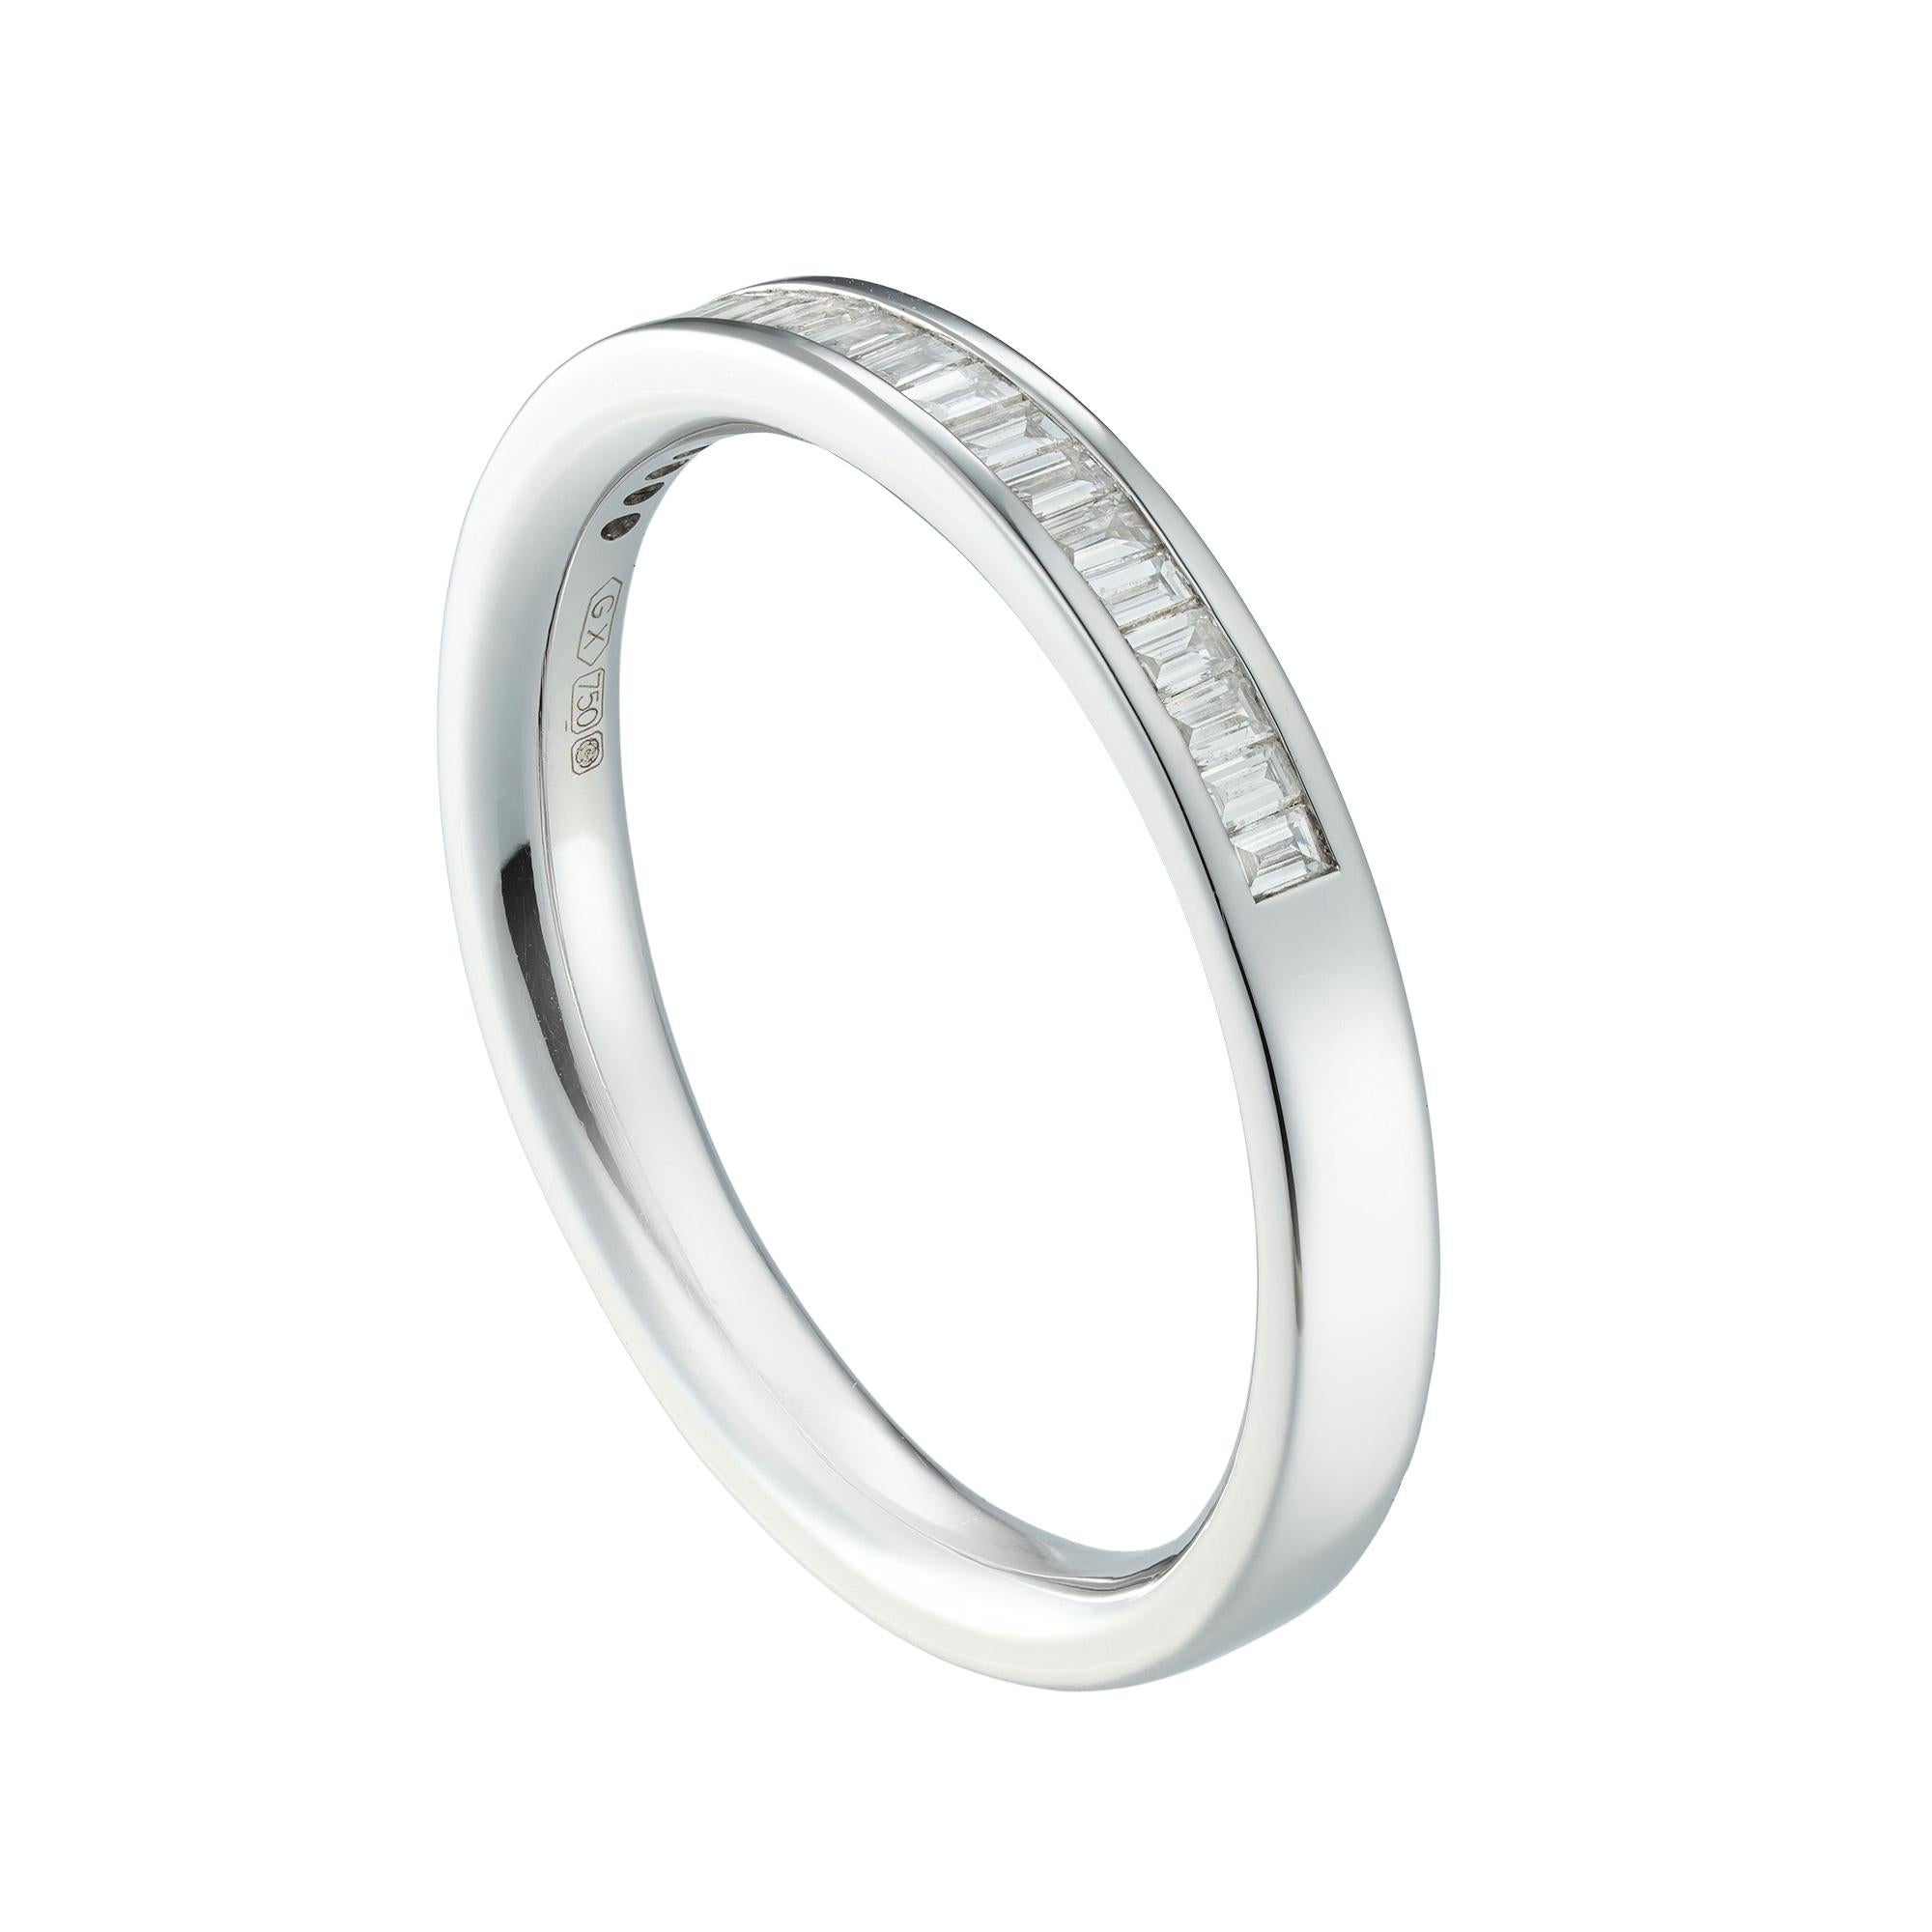 A half eternity diamond ring, consisting of nineteen baguette-cut diamonds, weighing 0.33 carats in total, all channel-set in white gold mount, hallmarked 18ct gold Sheffield, measuring 3mm wide, finger size Q, gross weight 4.1 grams.

A charming